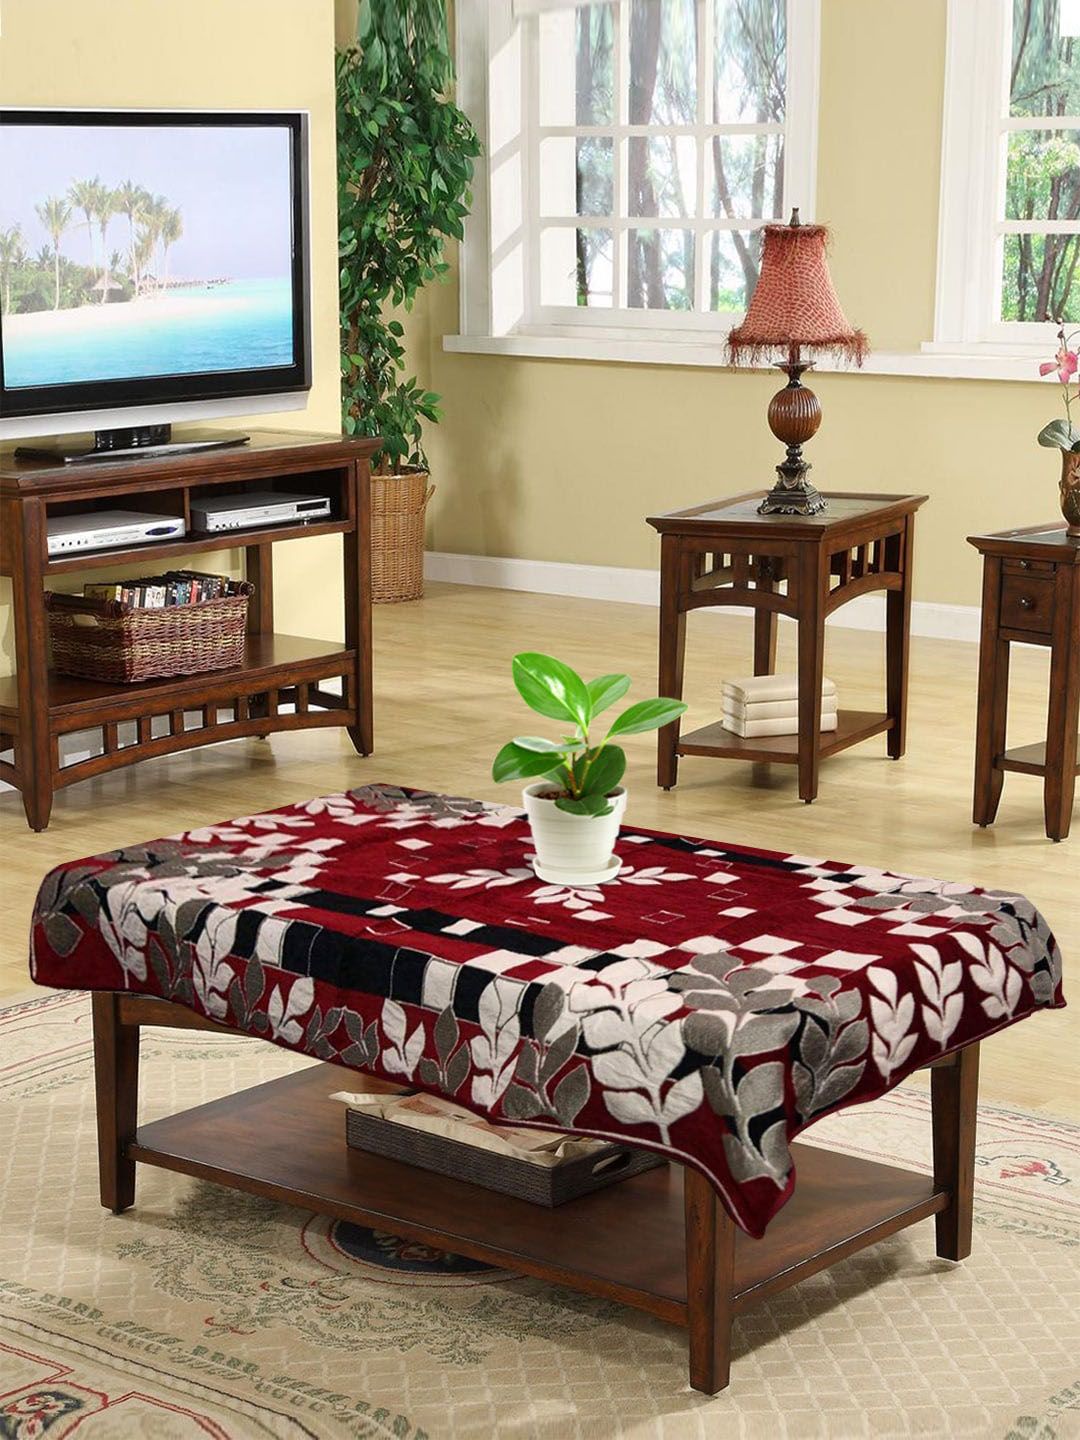 Kuber Industries Maroon & White Printed 4-Seater Rectangular Table Cover Price in India